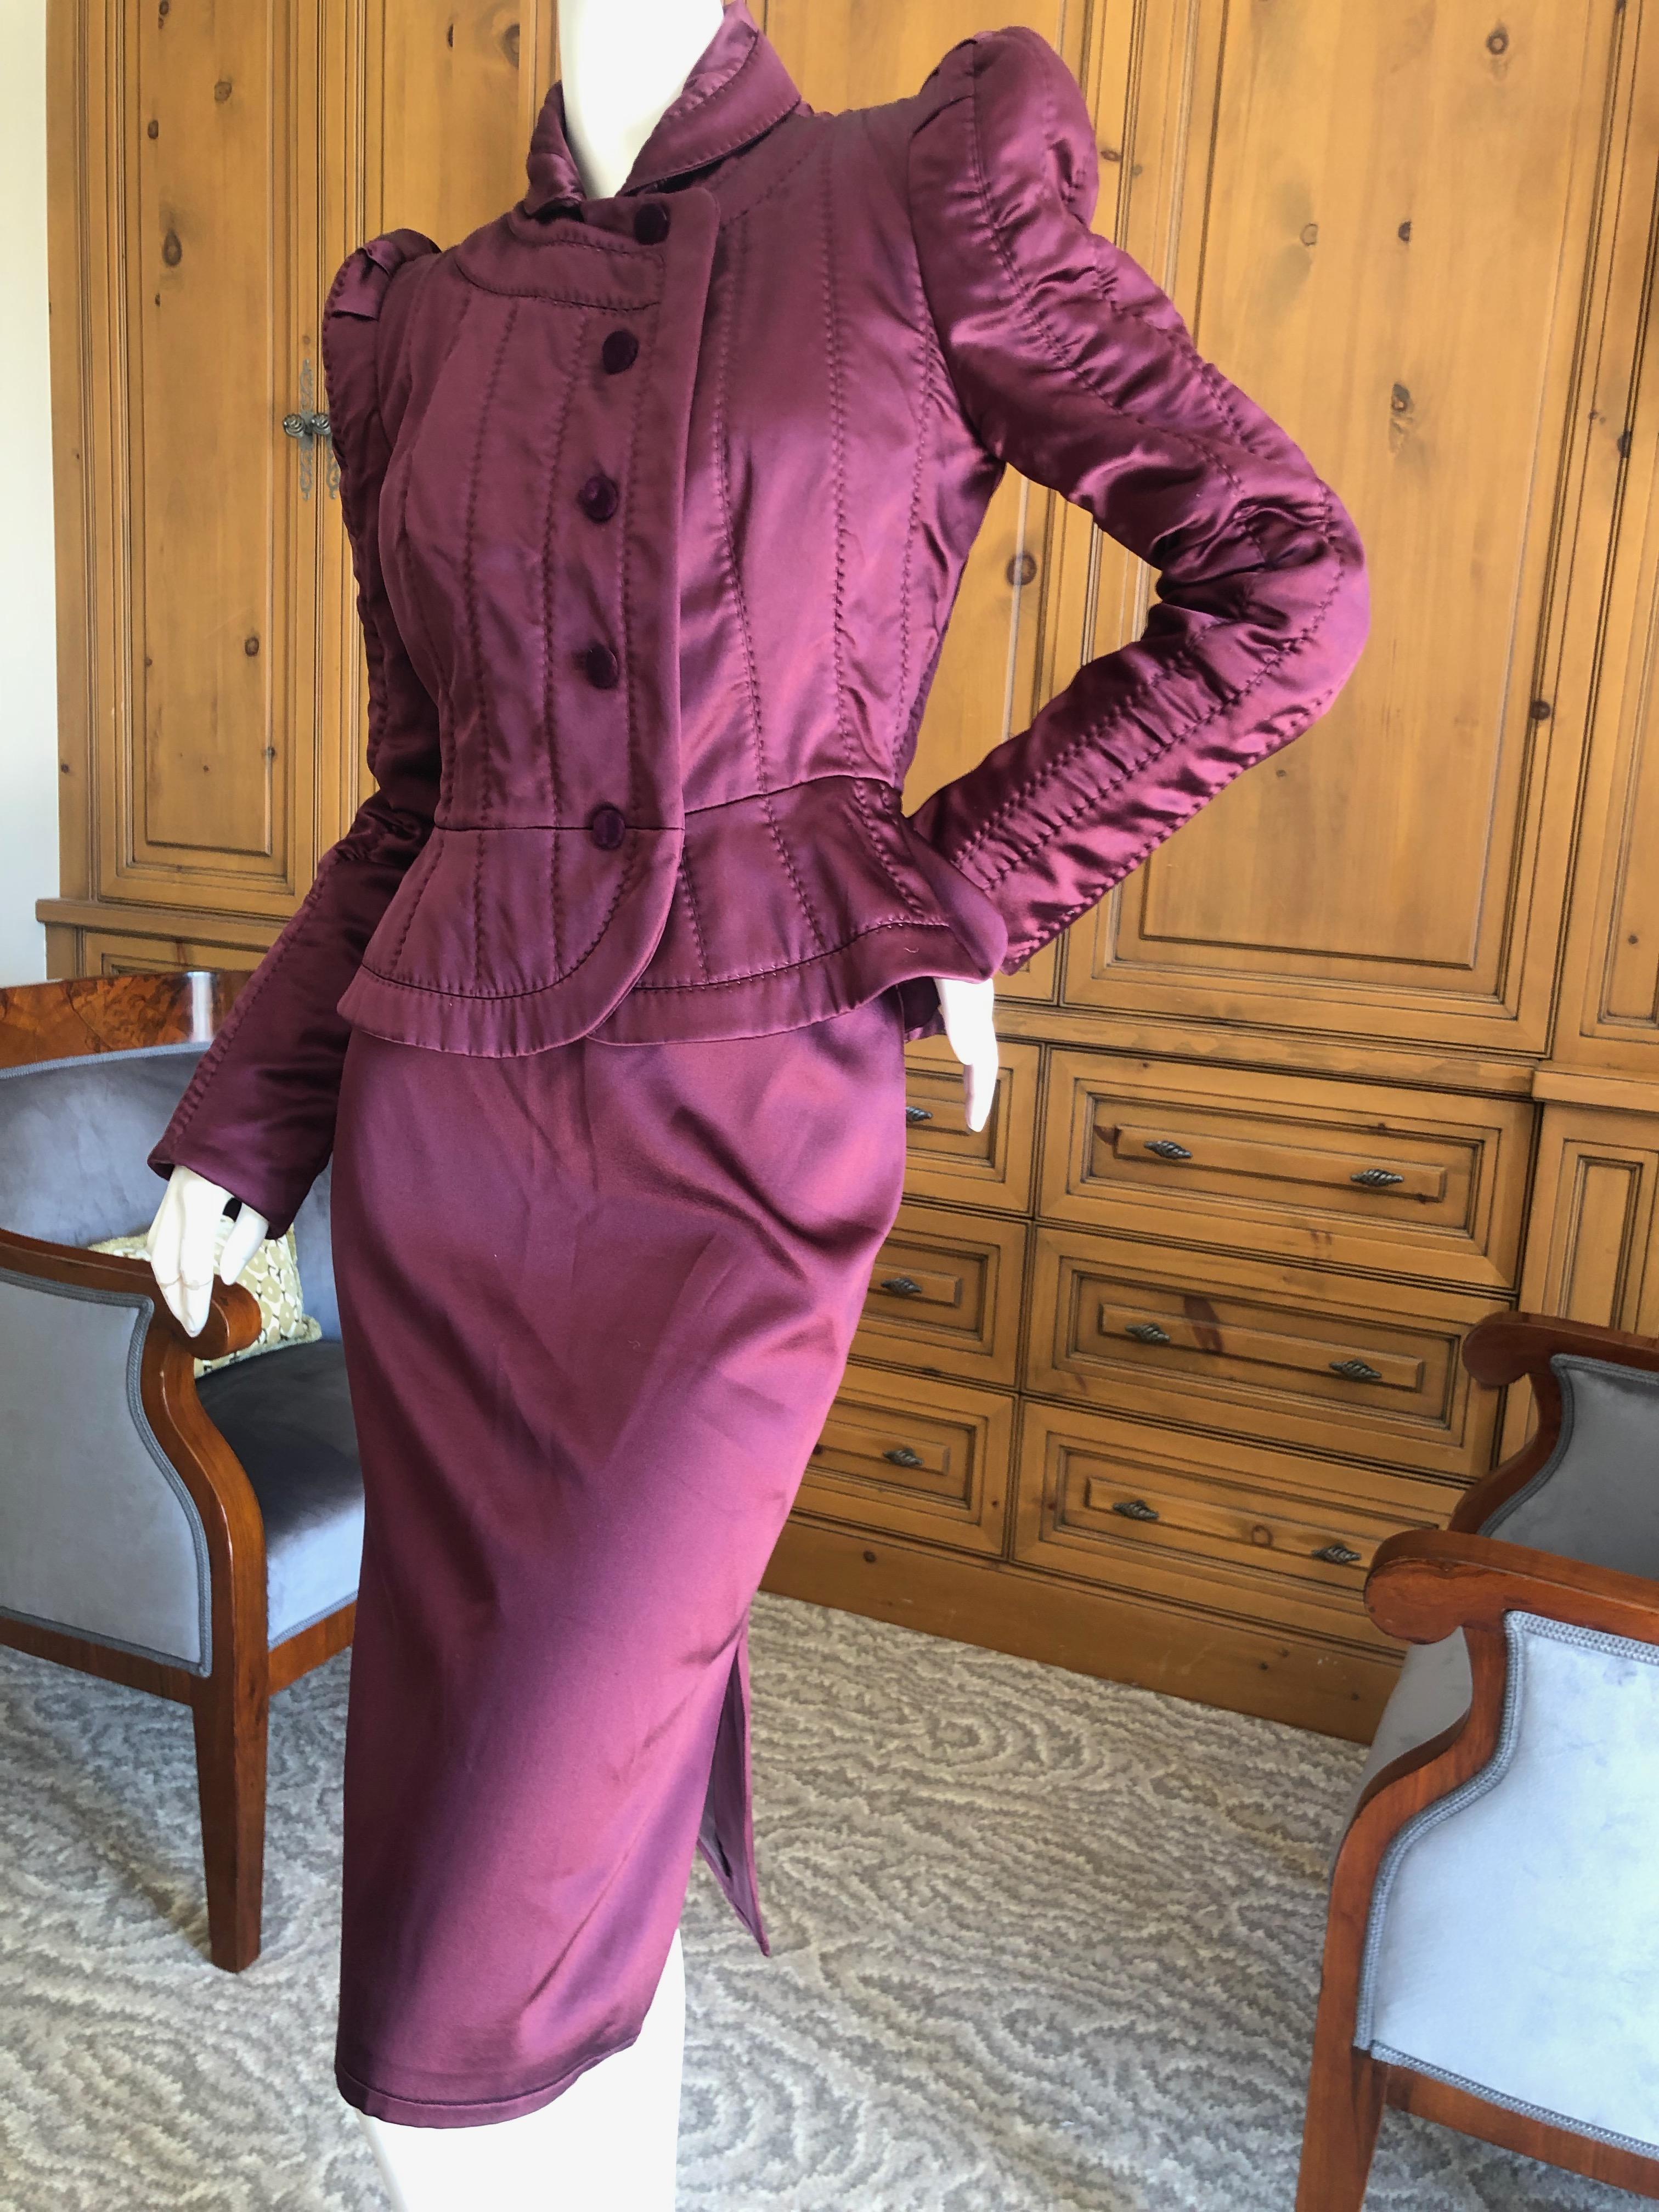 Yves Saint Laurent Tom Ford Fall 2004 Burgundy Silk Pagoda Shoulder Skirt Suit In Excellent Condition For Sale In Cloverdale, CA